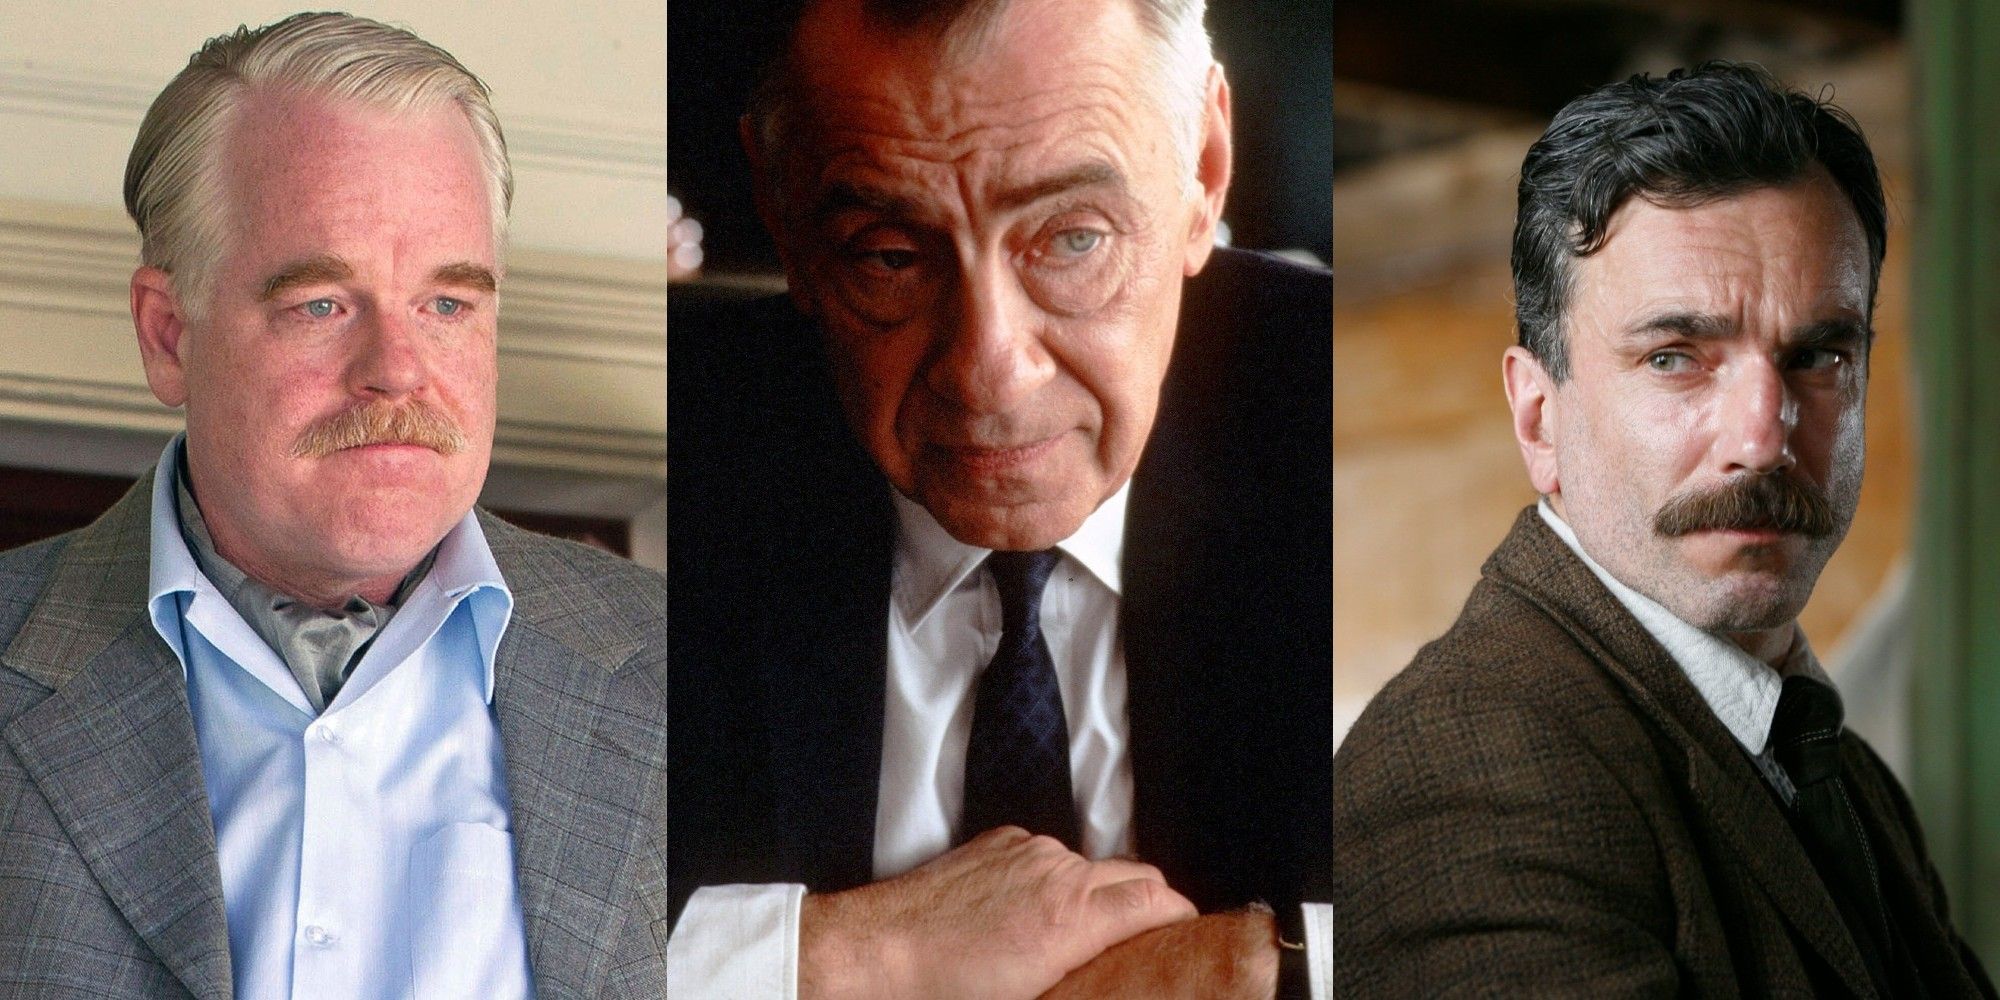 Philip Seymour Hoffman in The Master; Philip Baker Hall in Hard Eight; Daniel Day-Lewis in There Will Be Blood